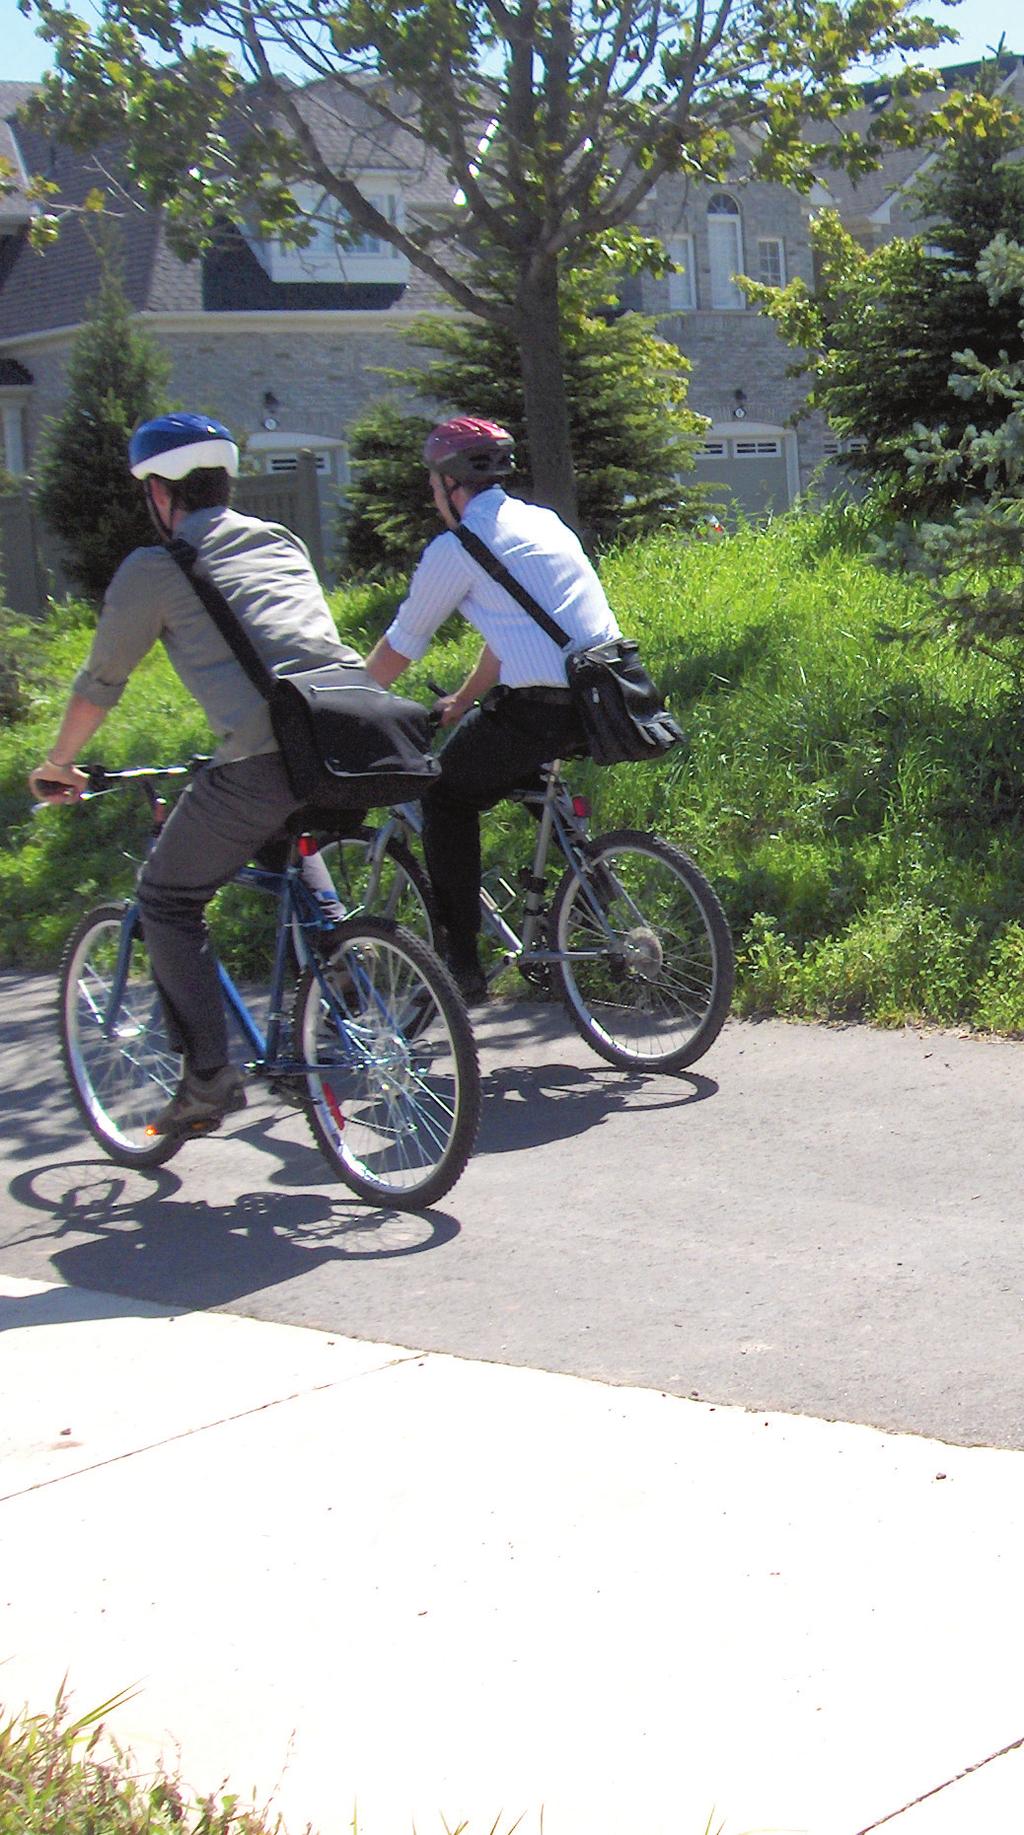 Just as with sidewalks, bicycle lanes and paths need to connect places if they are going to be used for active transportation.